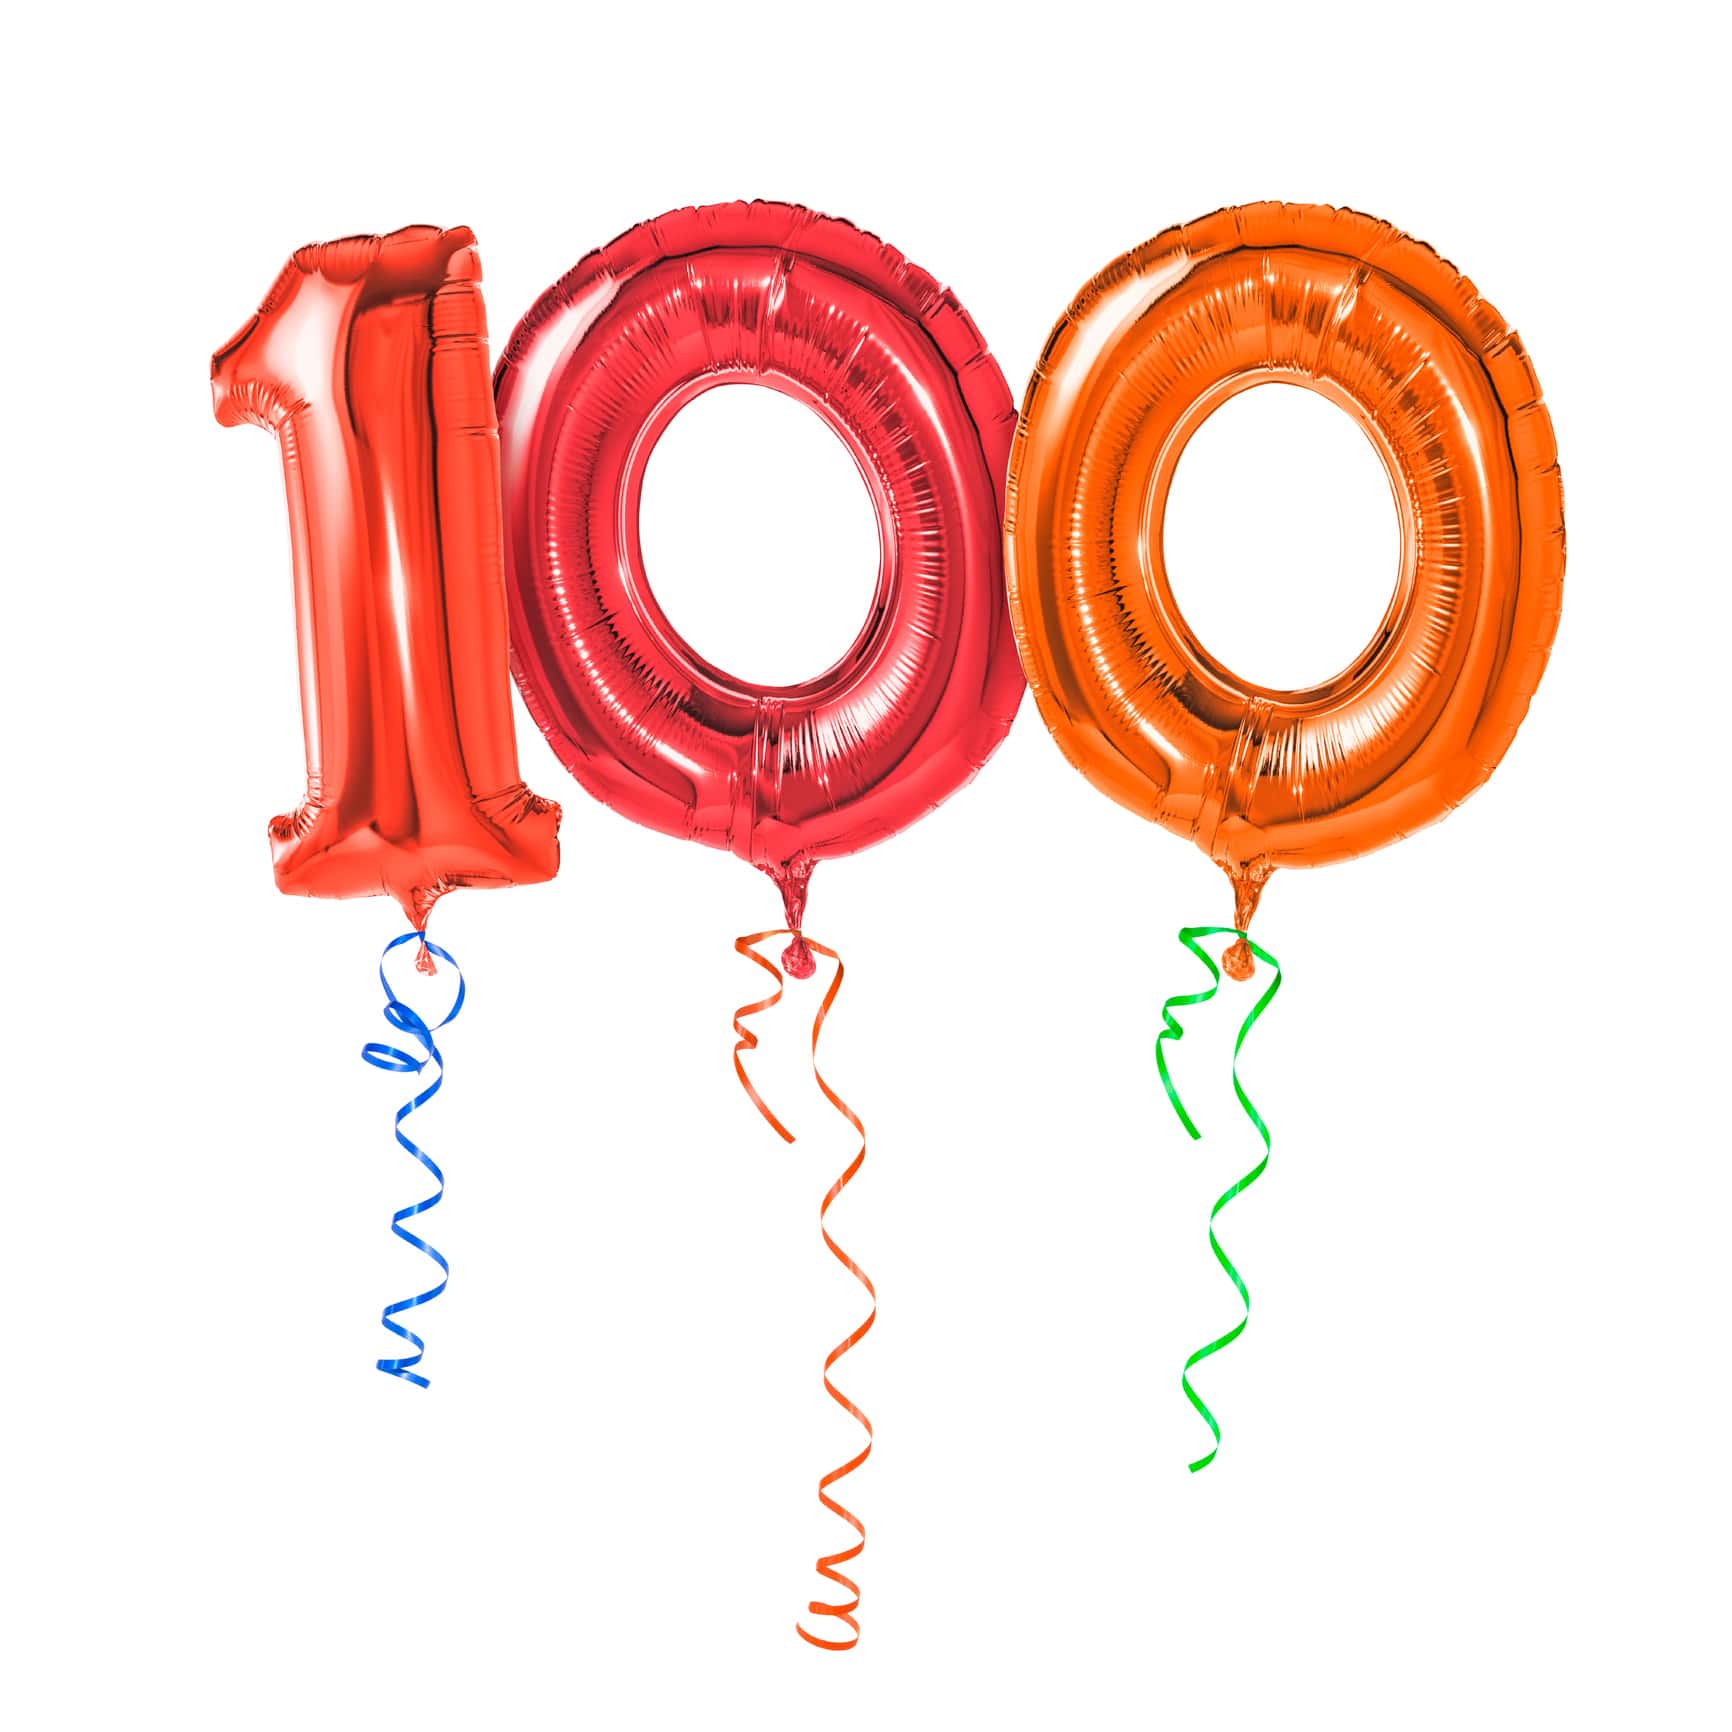 15 Tips to Live to 100